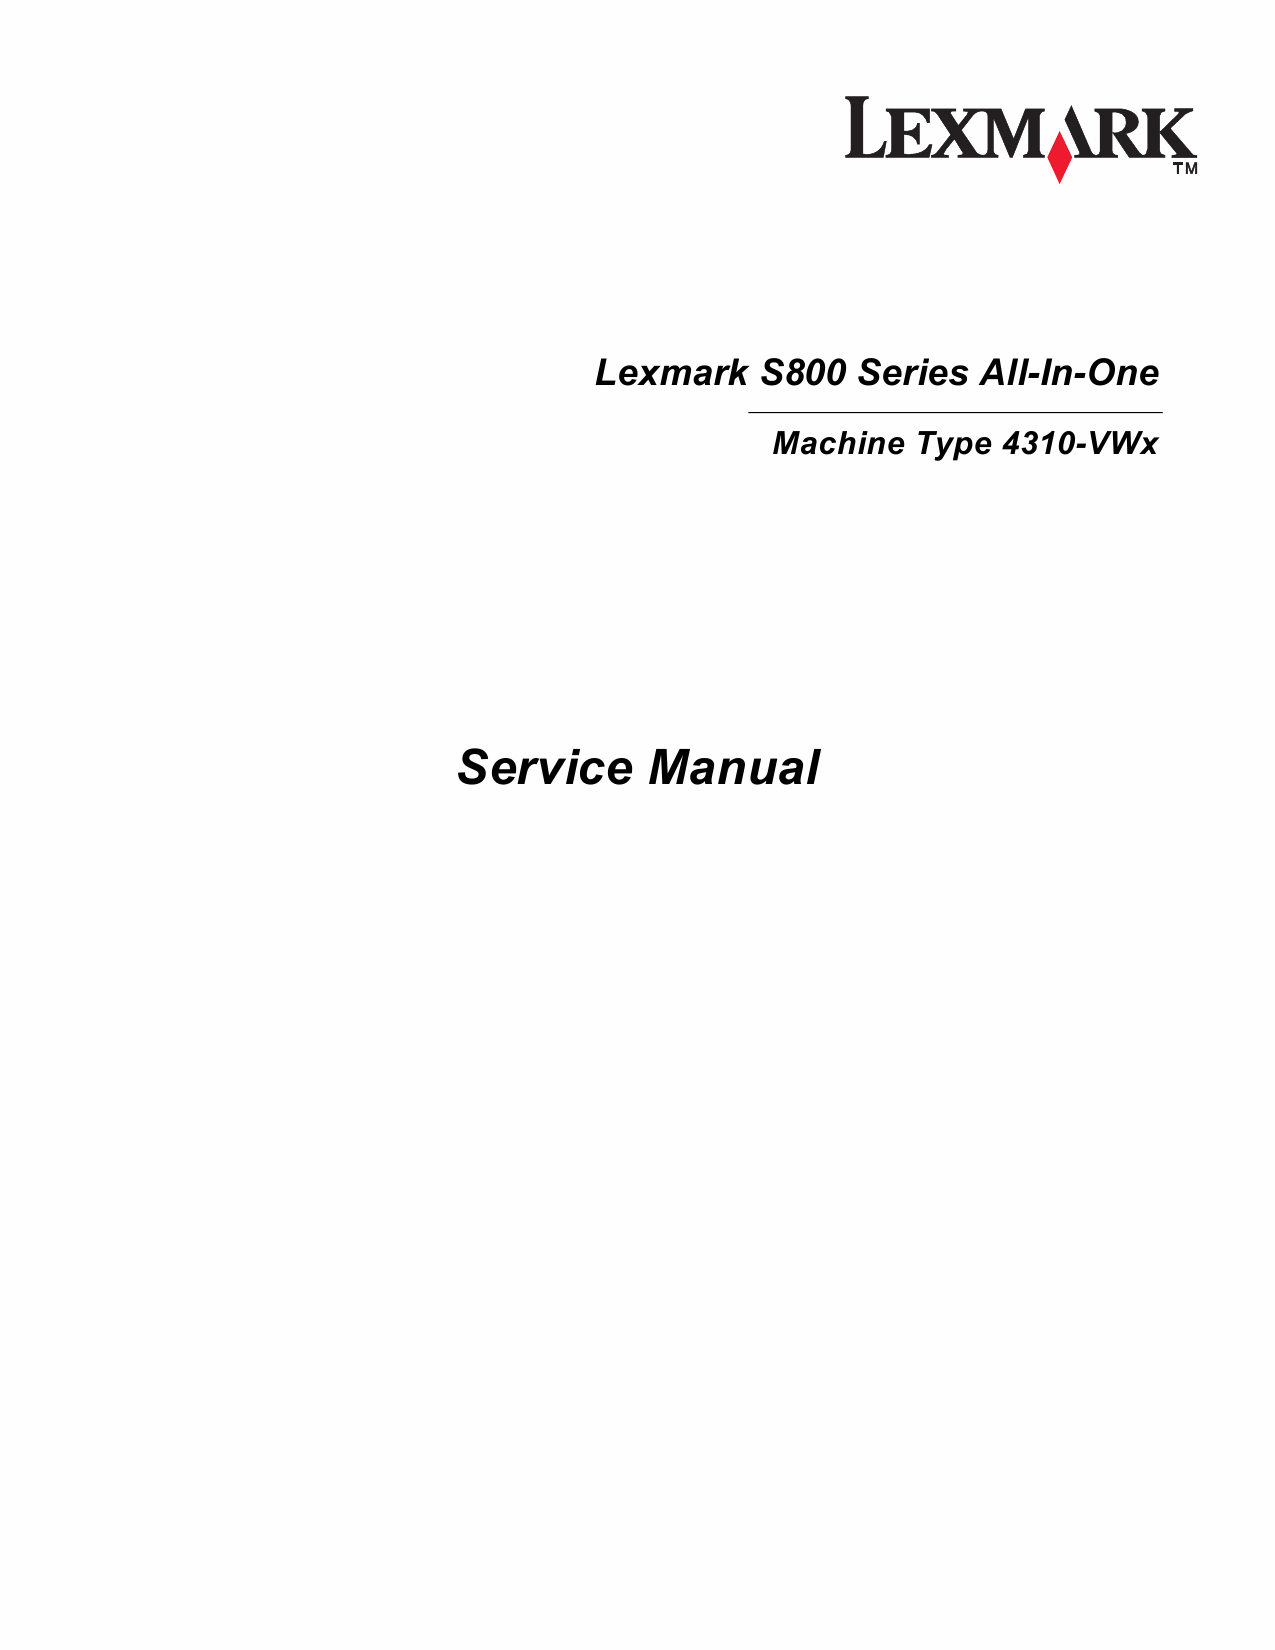 Lexmark All-In-One S800 4310 Service Manual-1